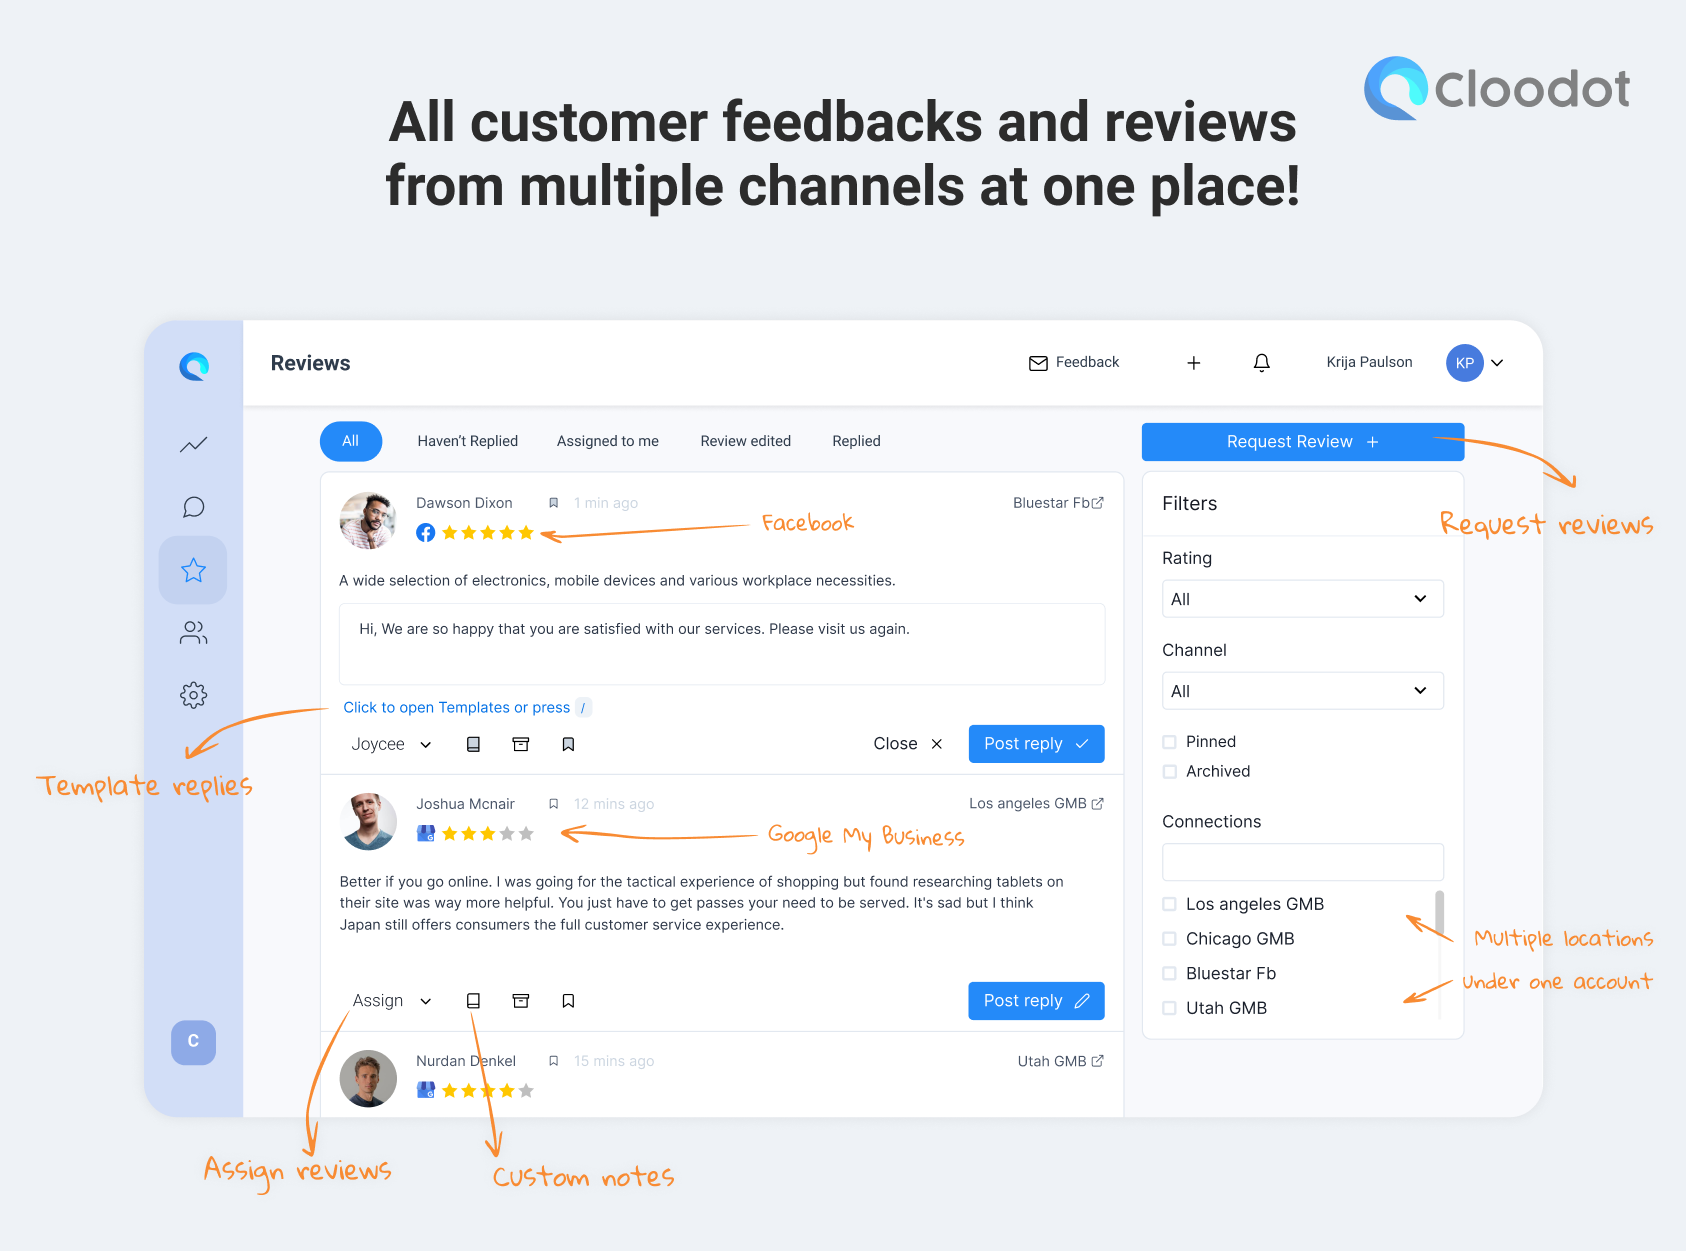 All customer feedbacks and reviews from multiple channels at one place!